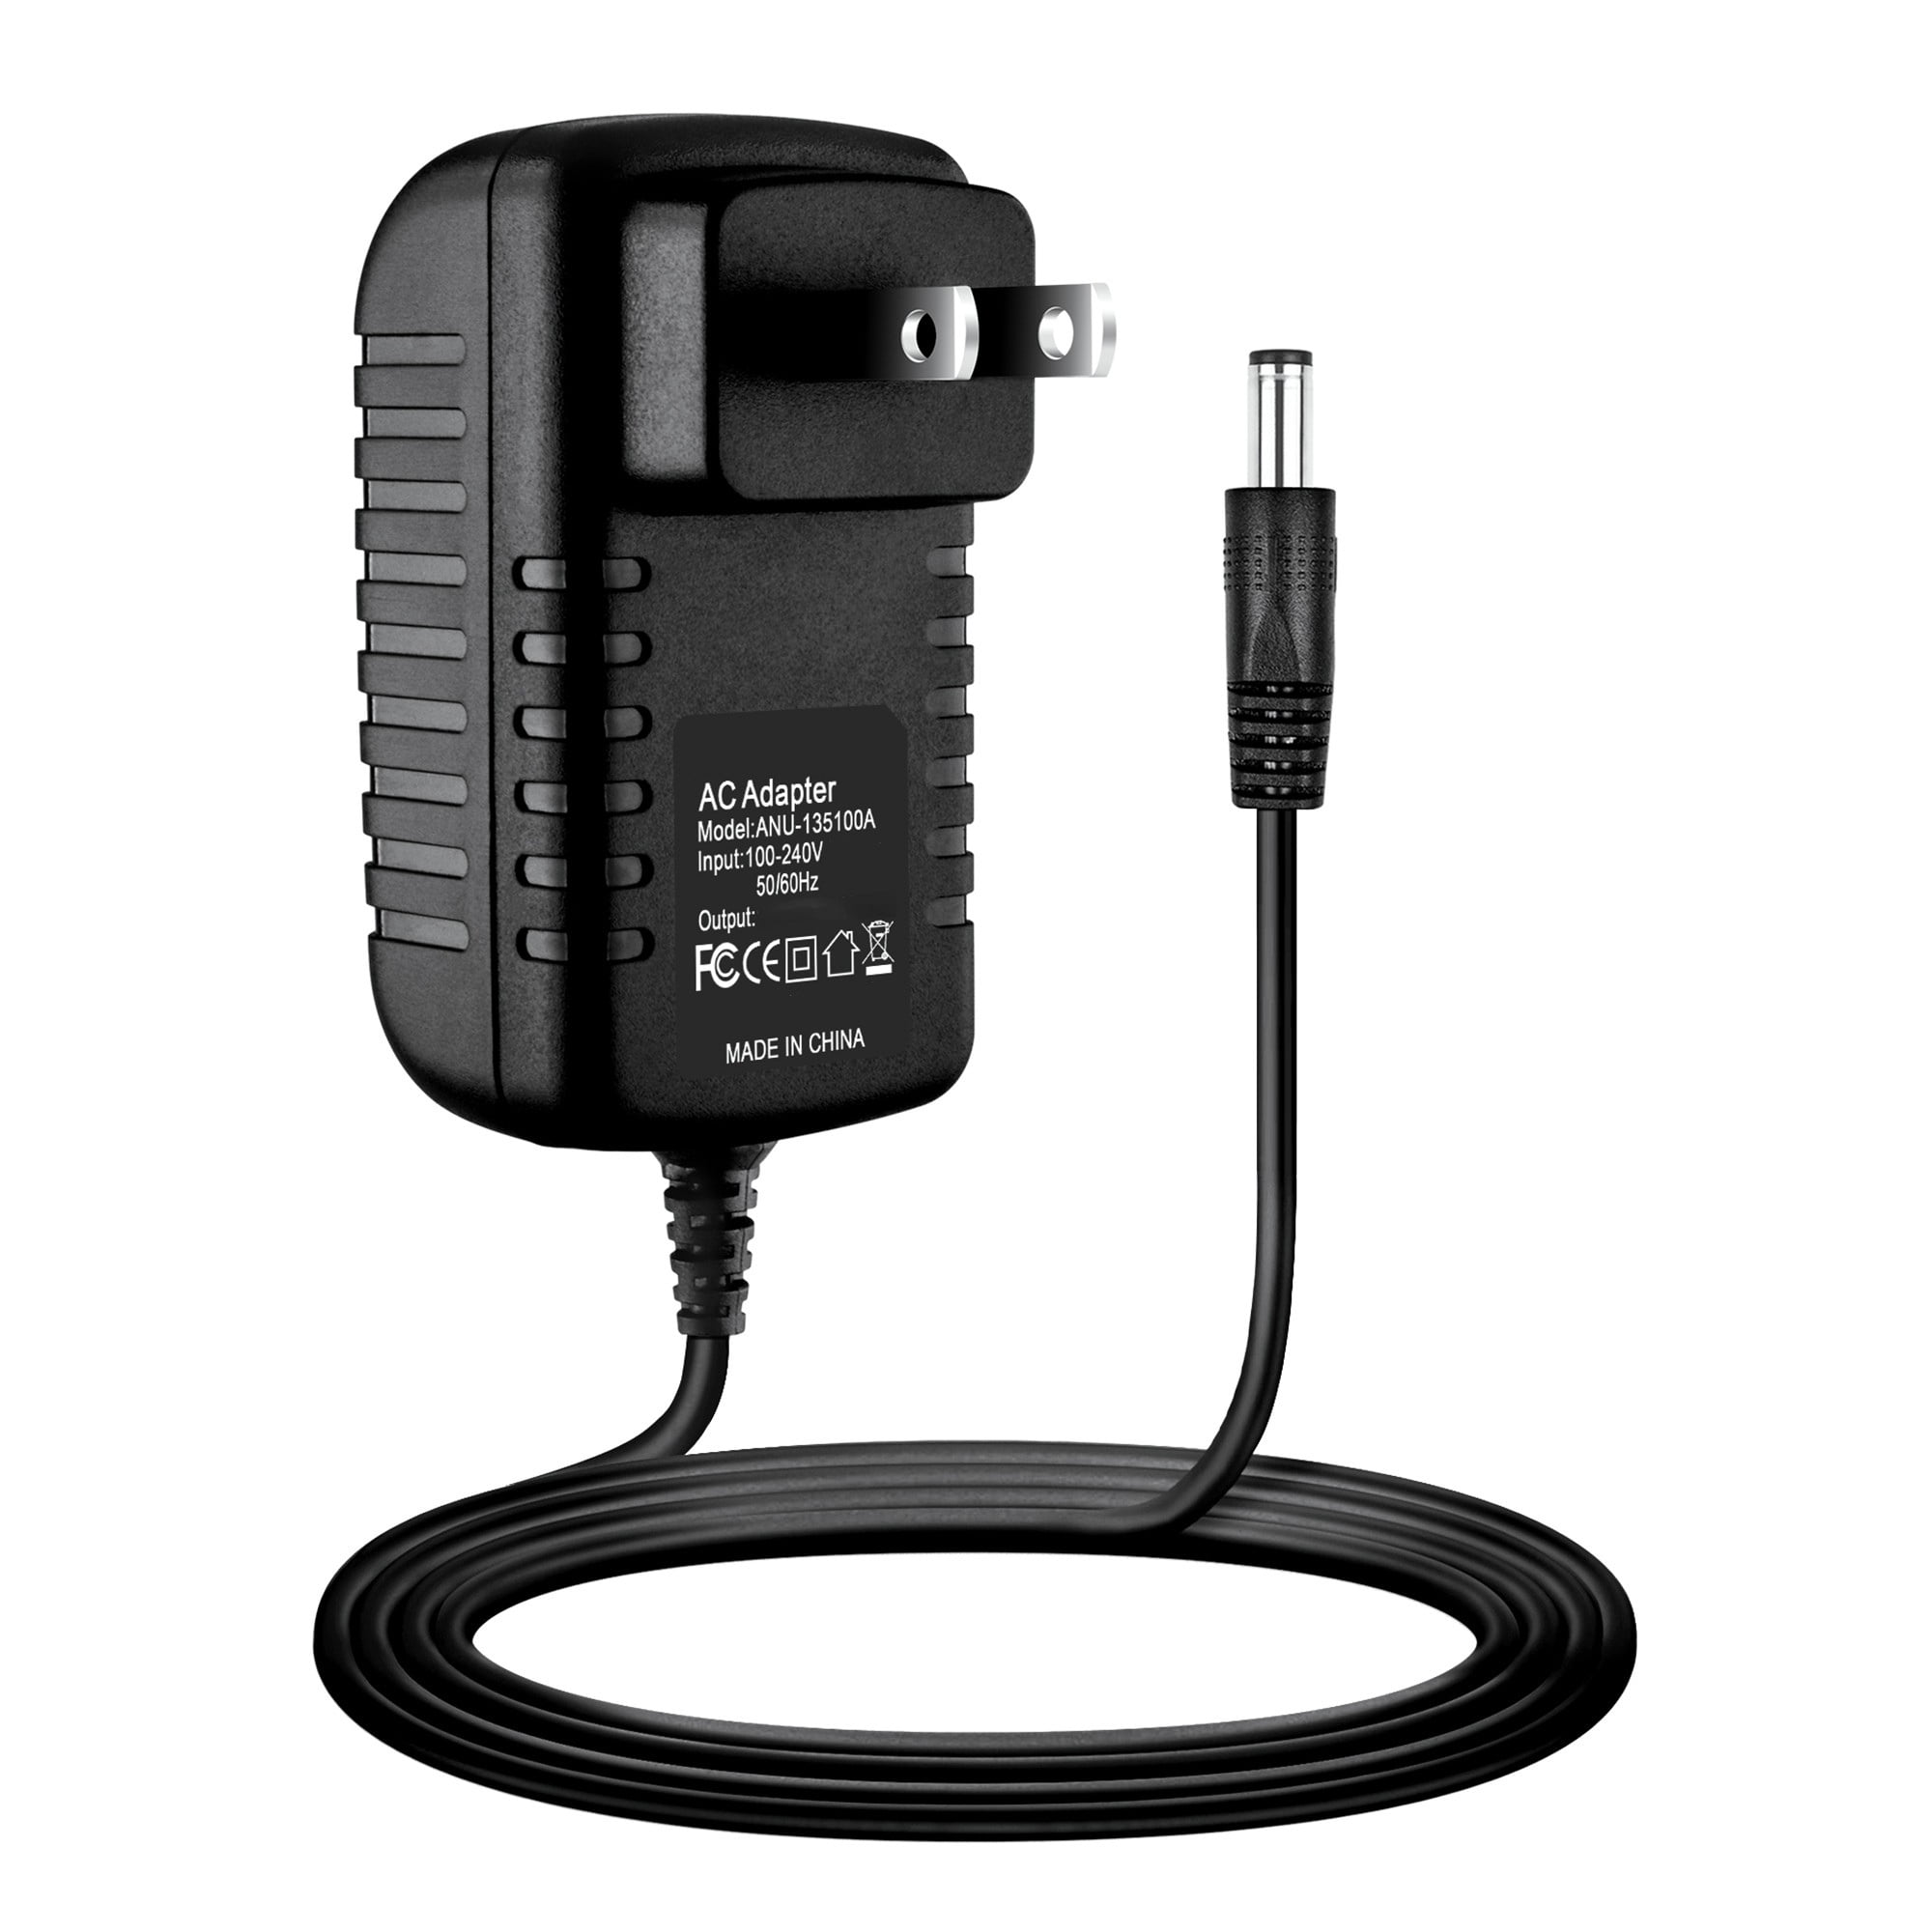 AC/DC Adapter For Amcrest ATC-1201 12MP Digital Game Cam Hunting & Trail Camera 